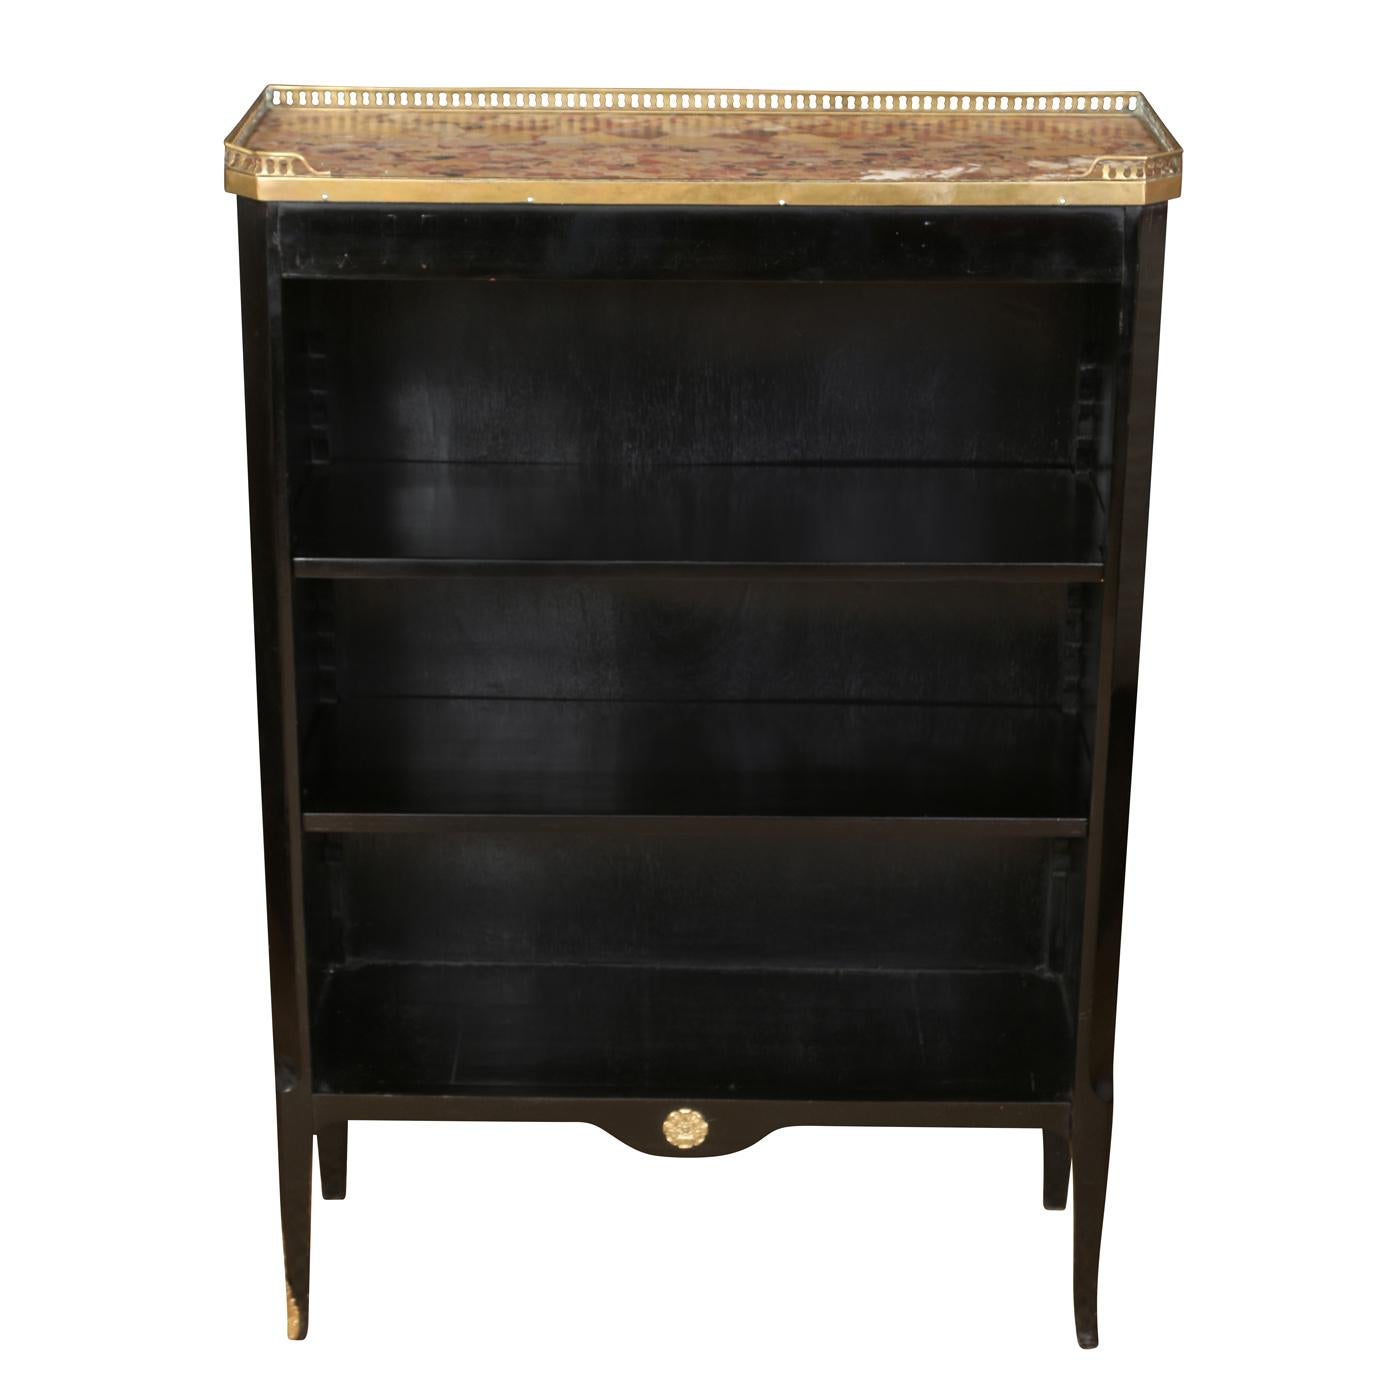 A pair of ebonized Louis XV style bookcases circa 1940, with a coral tone marble top and brass gallery and ormolu mountings to feet and apron.